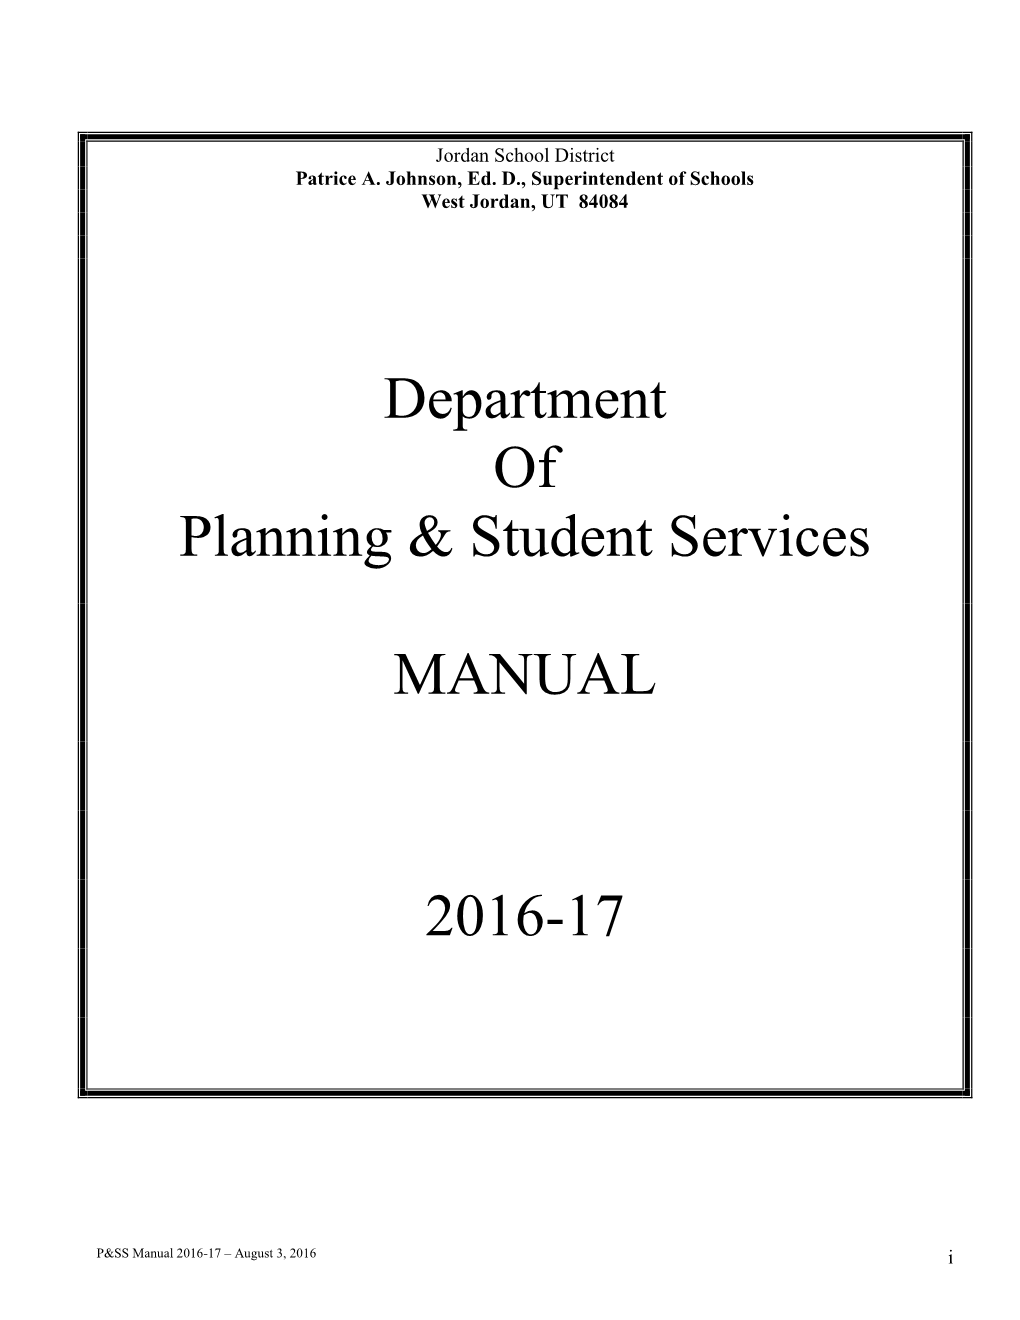 27. Planning & Student Services Manual 2016-17